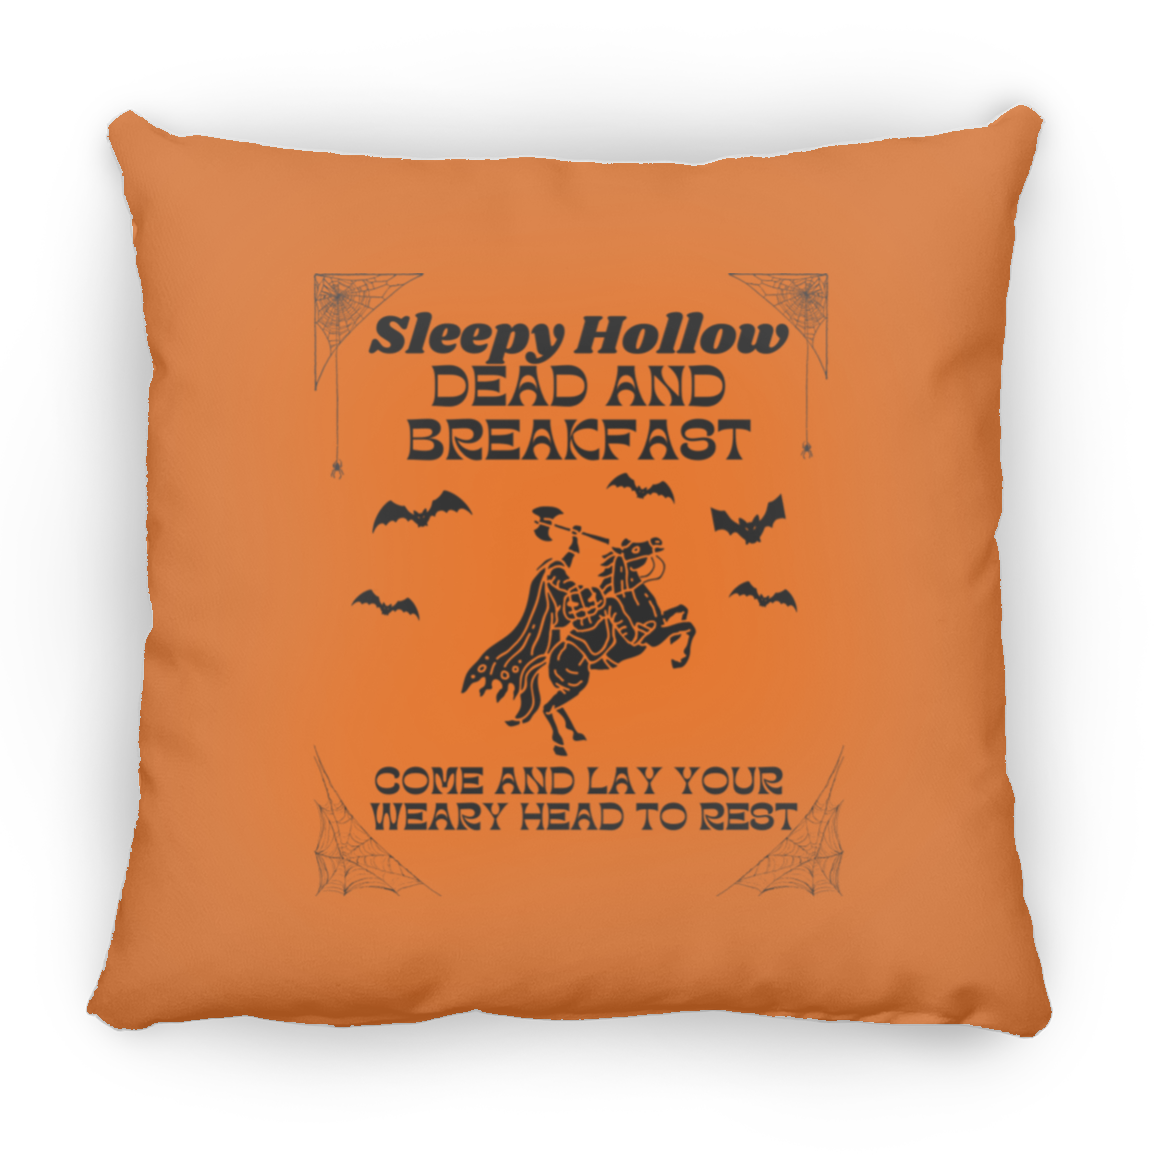 Get trendy with Sleepy Hollow Small Square Pillow - Housewares available at Good Gift Company. Grab yours for $22.95 today!